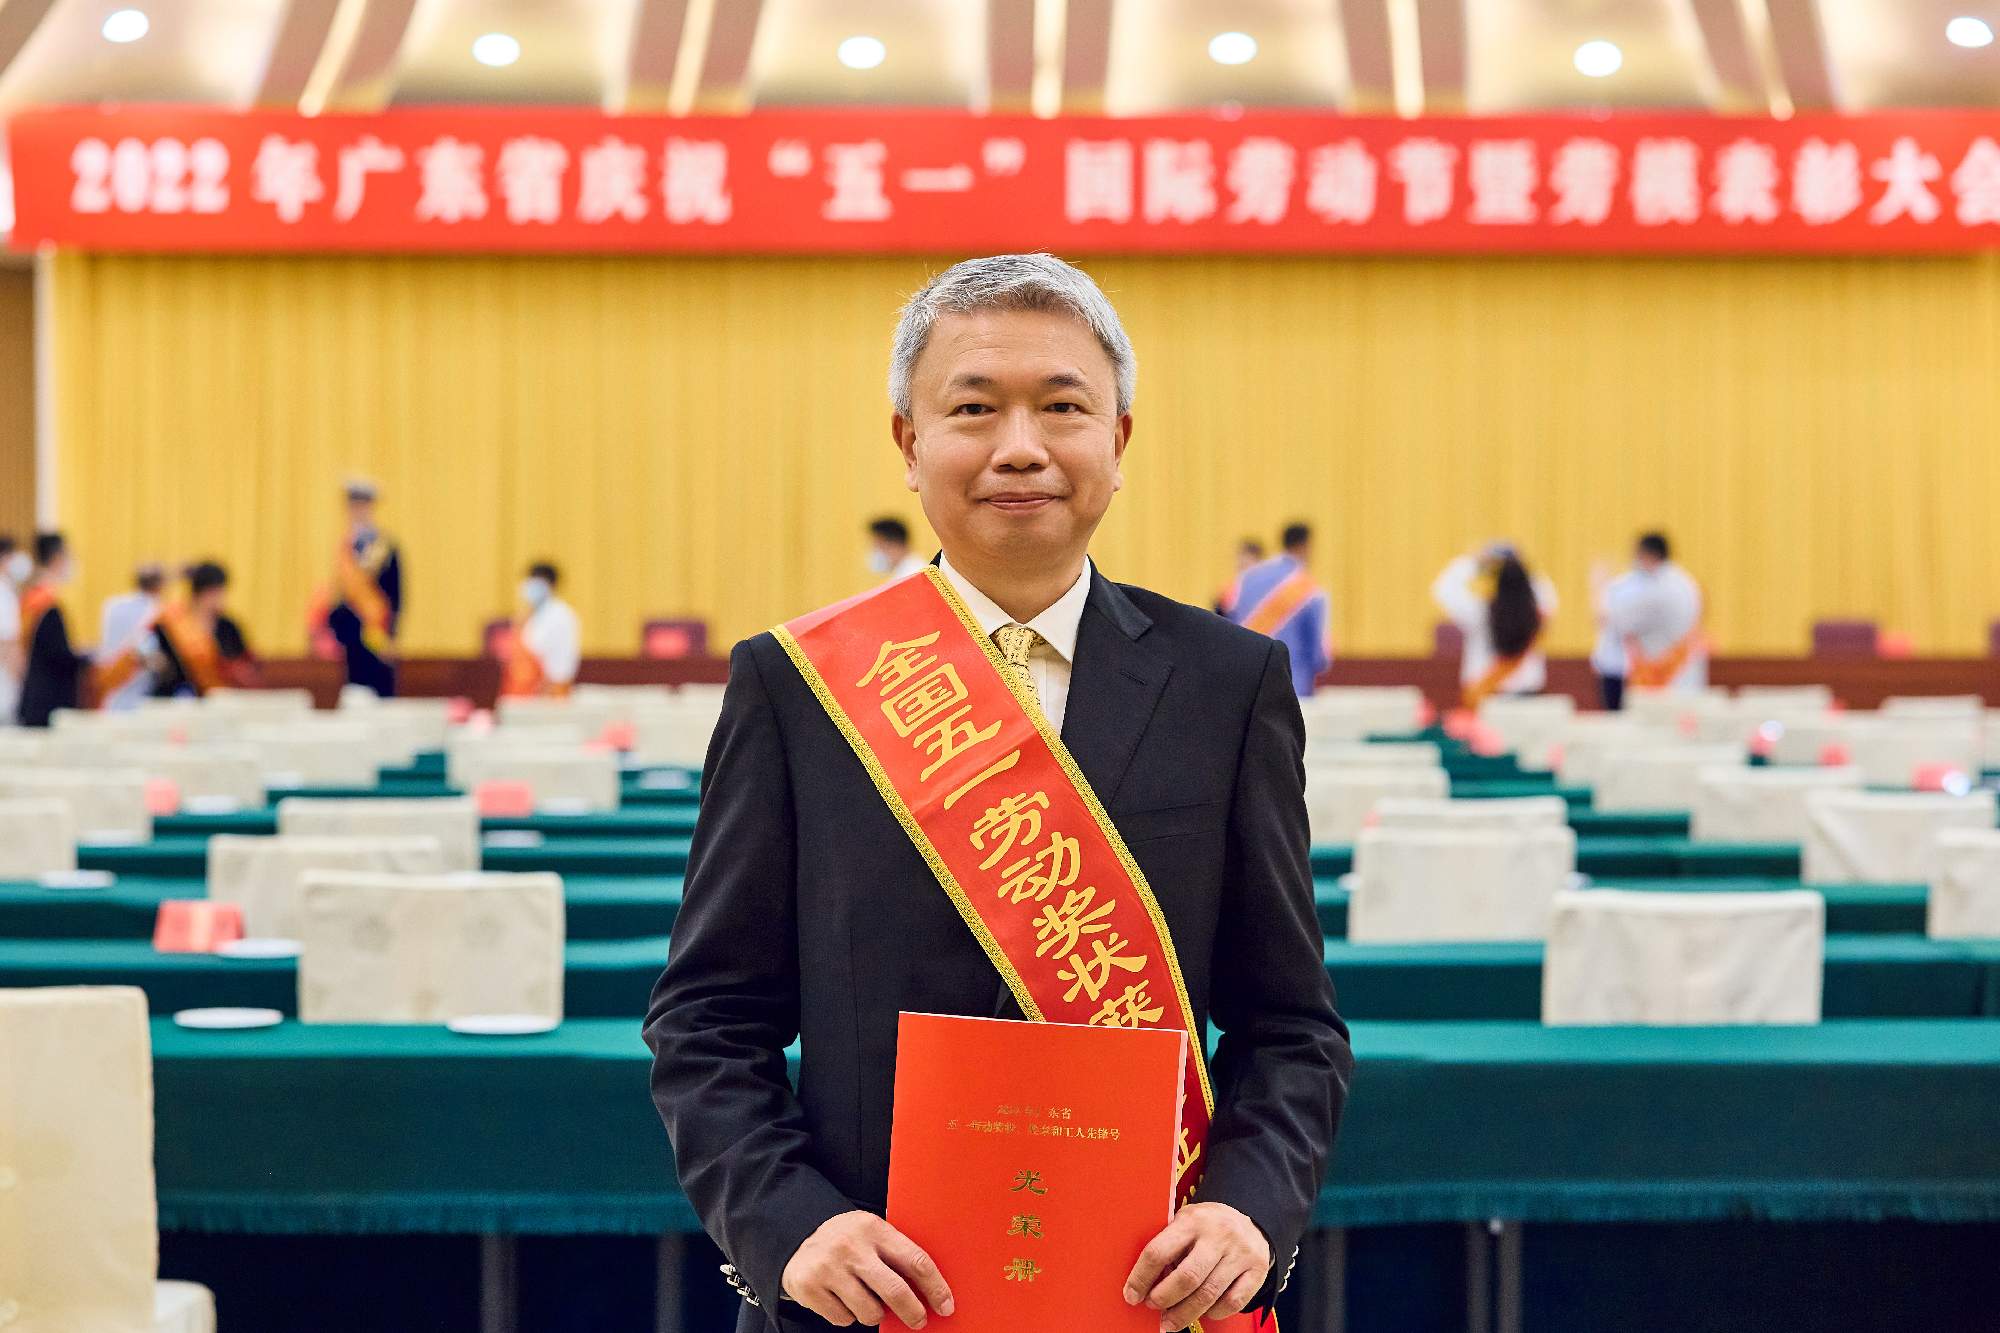 2005 EMBA alumnus Wu Jie led the enterprise to win the National May day Labor Medal